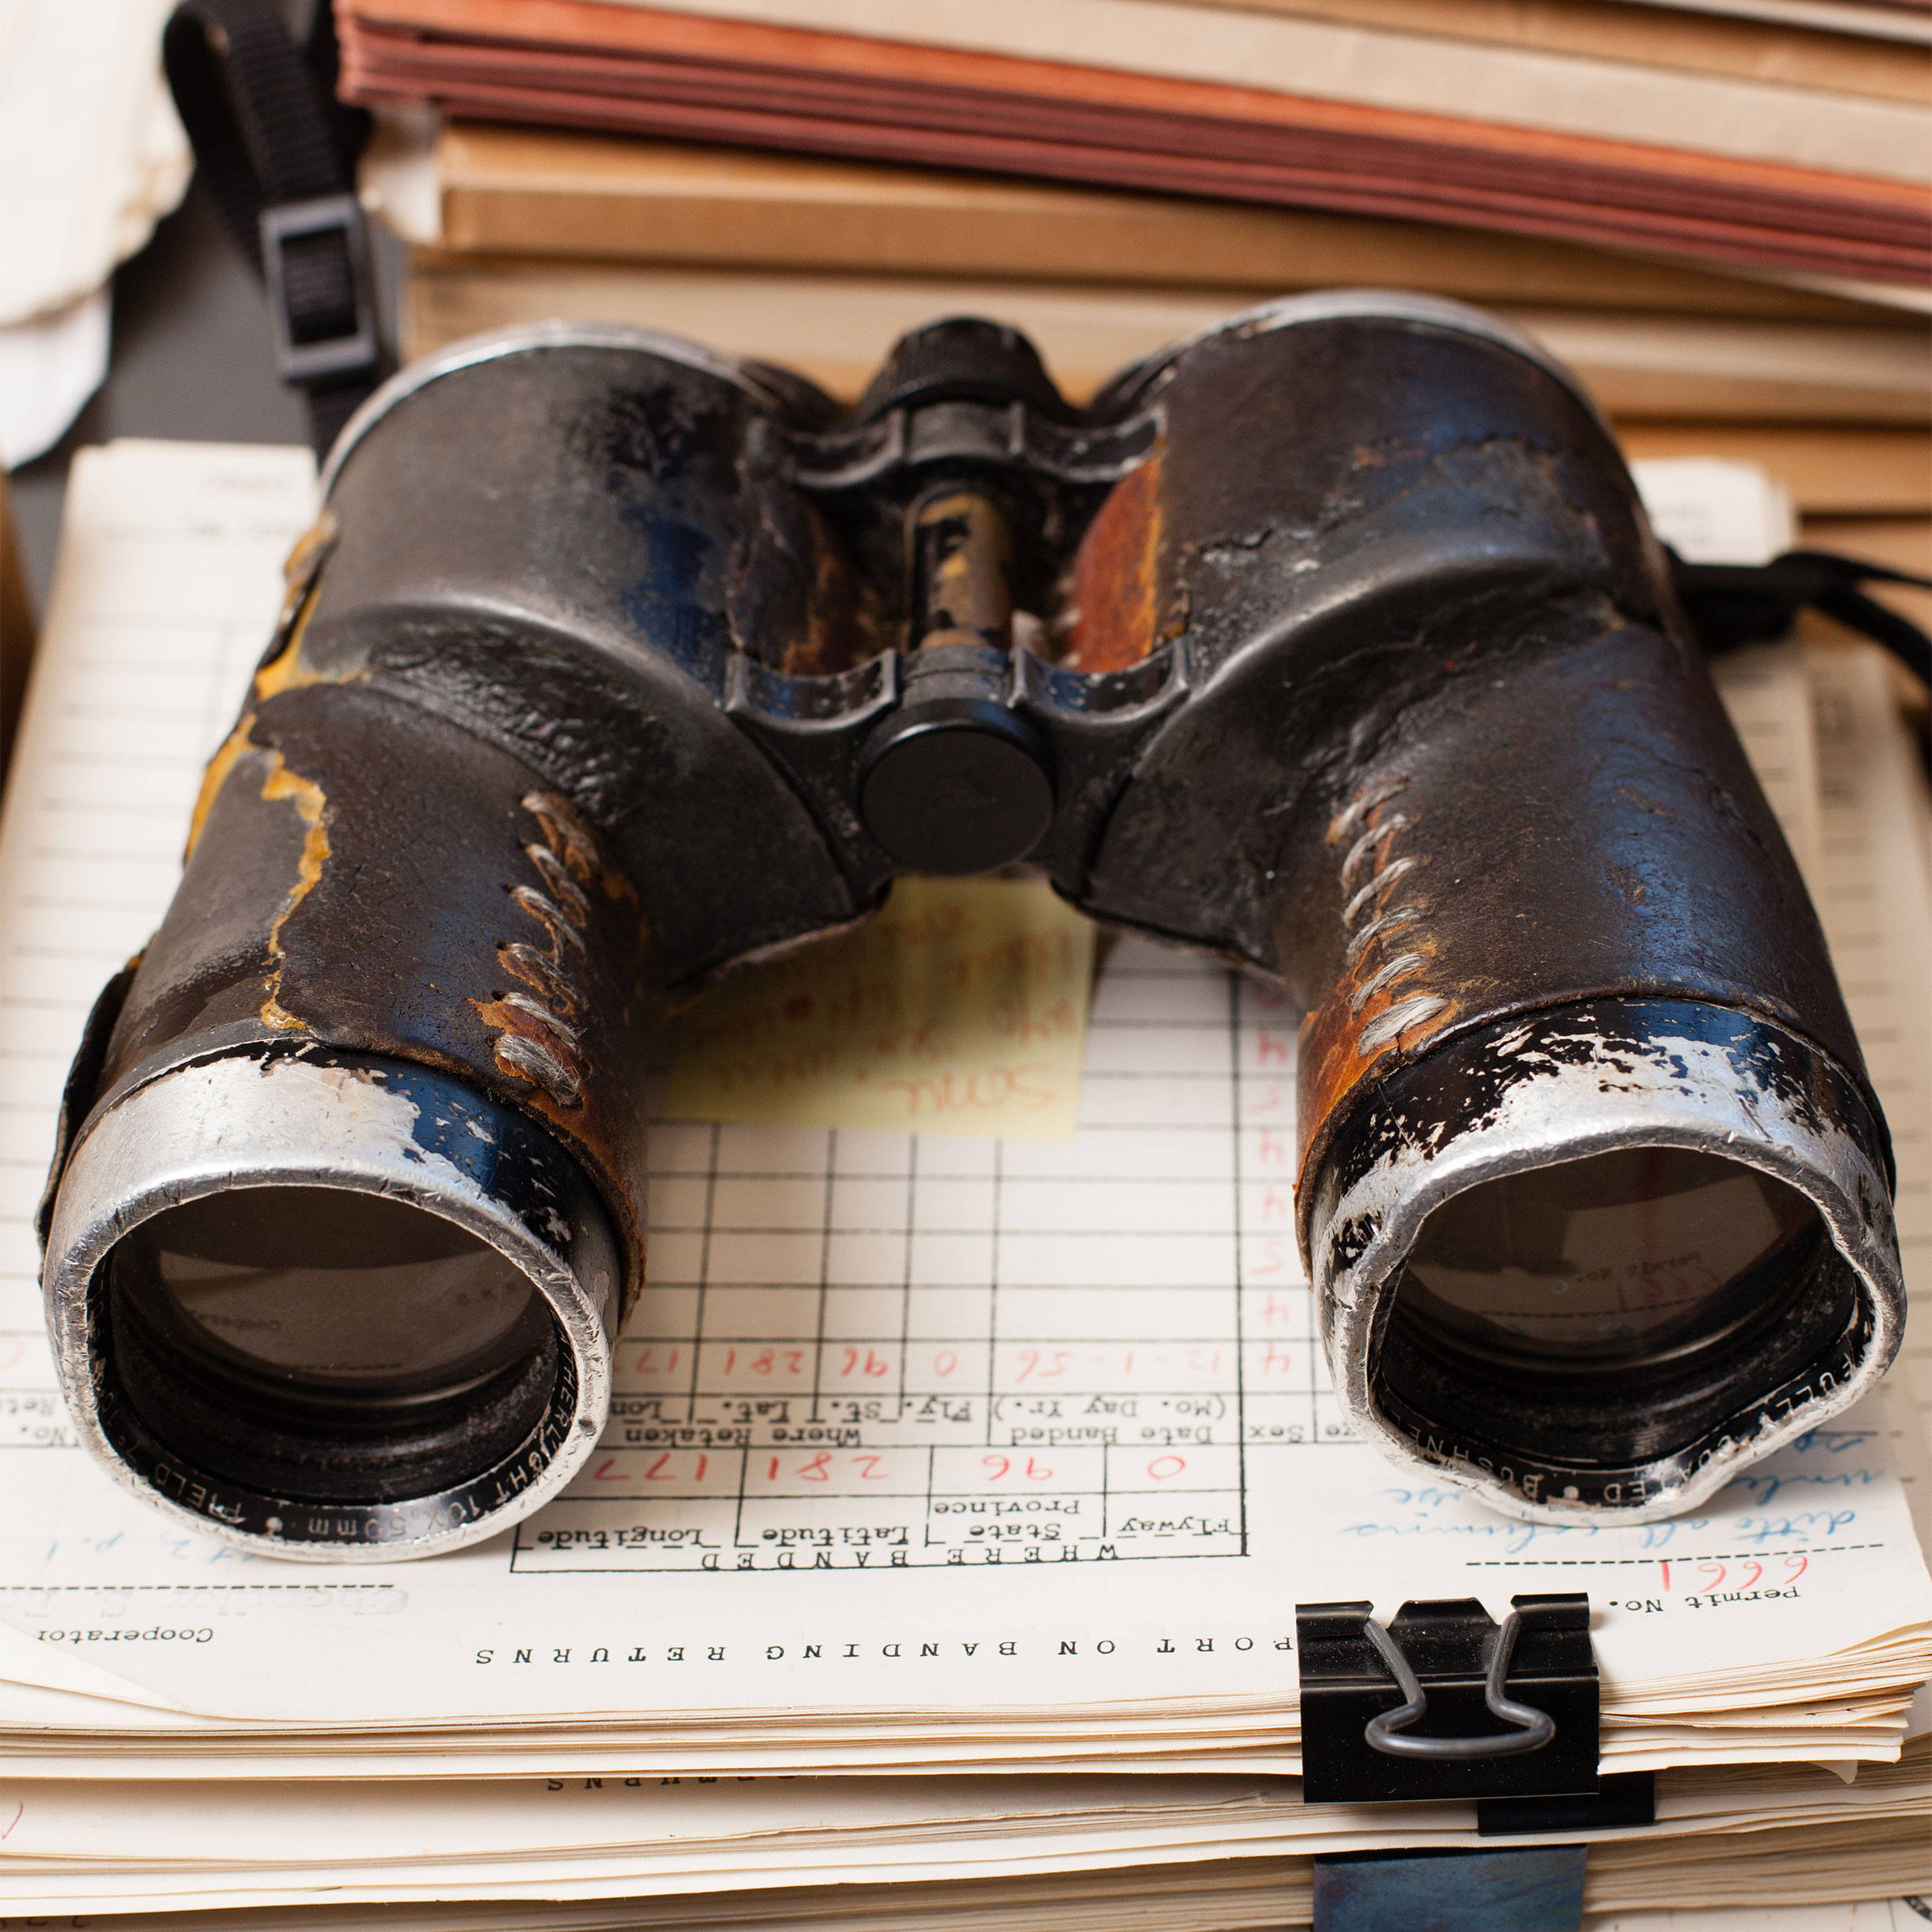 What to Do with Your Old Binoculars | Audubon